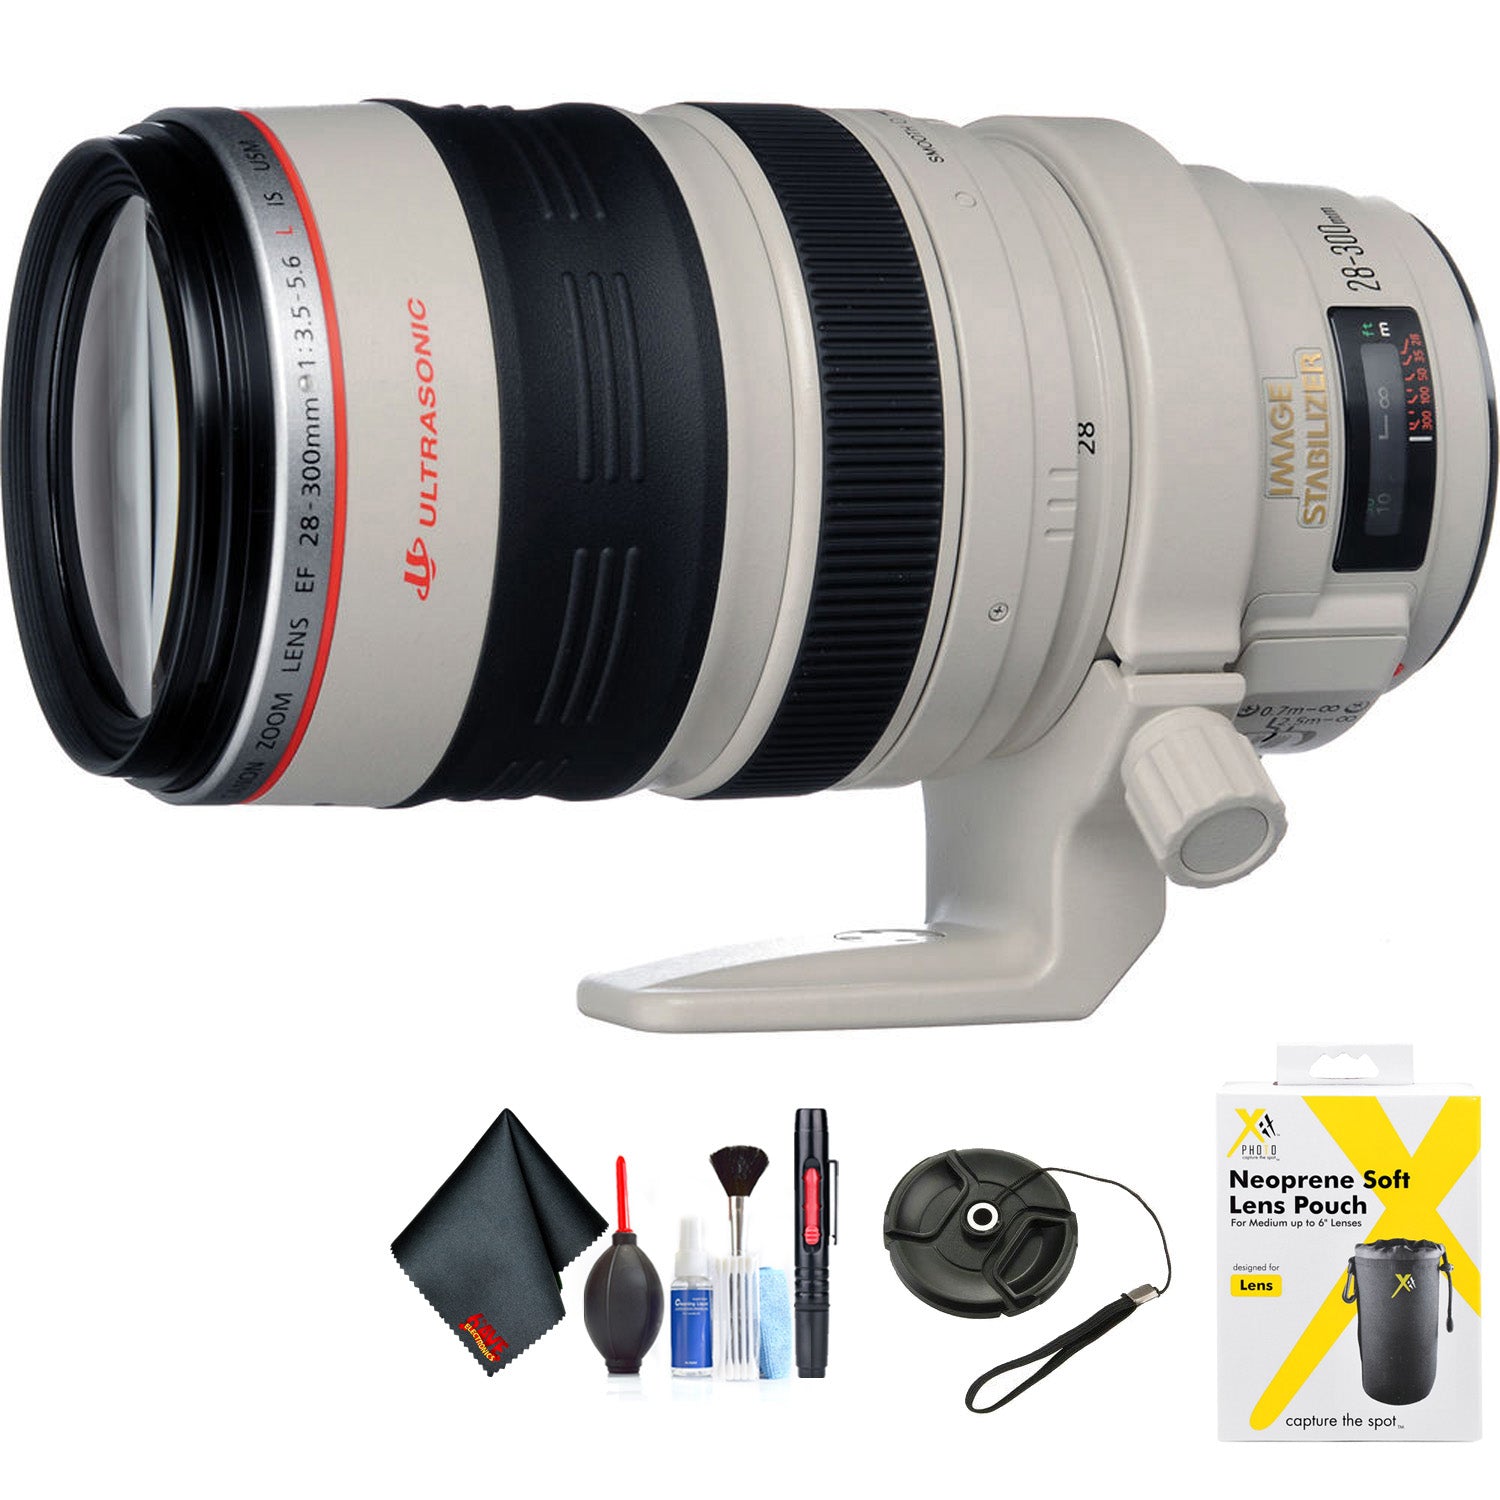 Canon EF 28-300mm f/3.5-5.6L is USM Lens for EF-Mount Mount + Accessories (International Model with 2 Year Warranty)